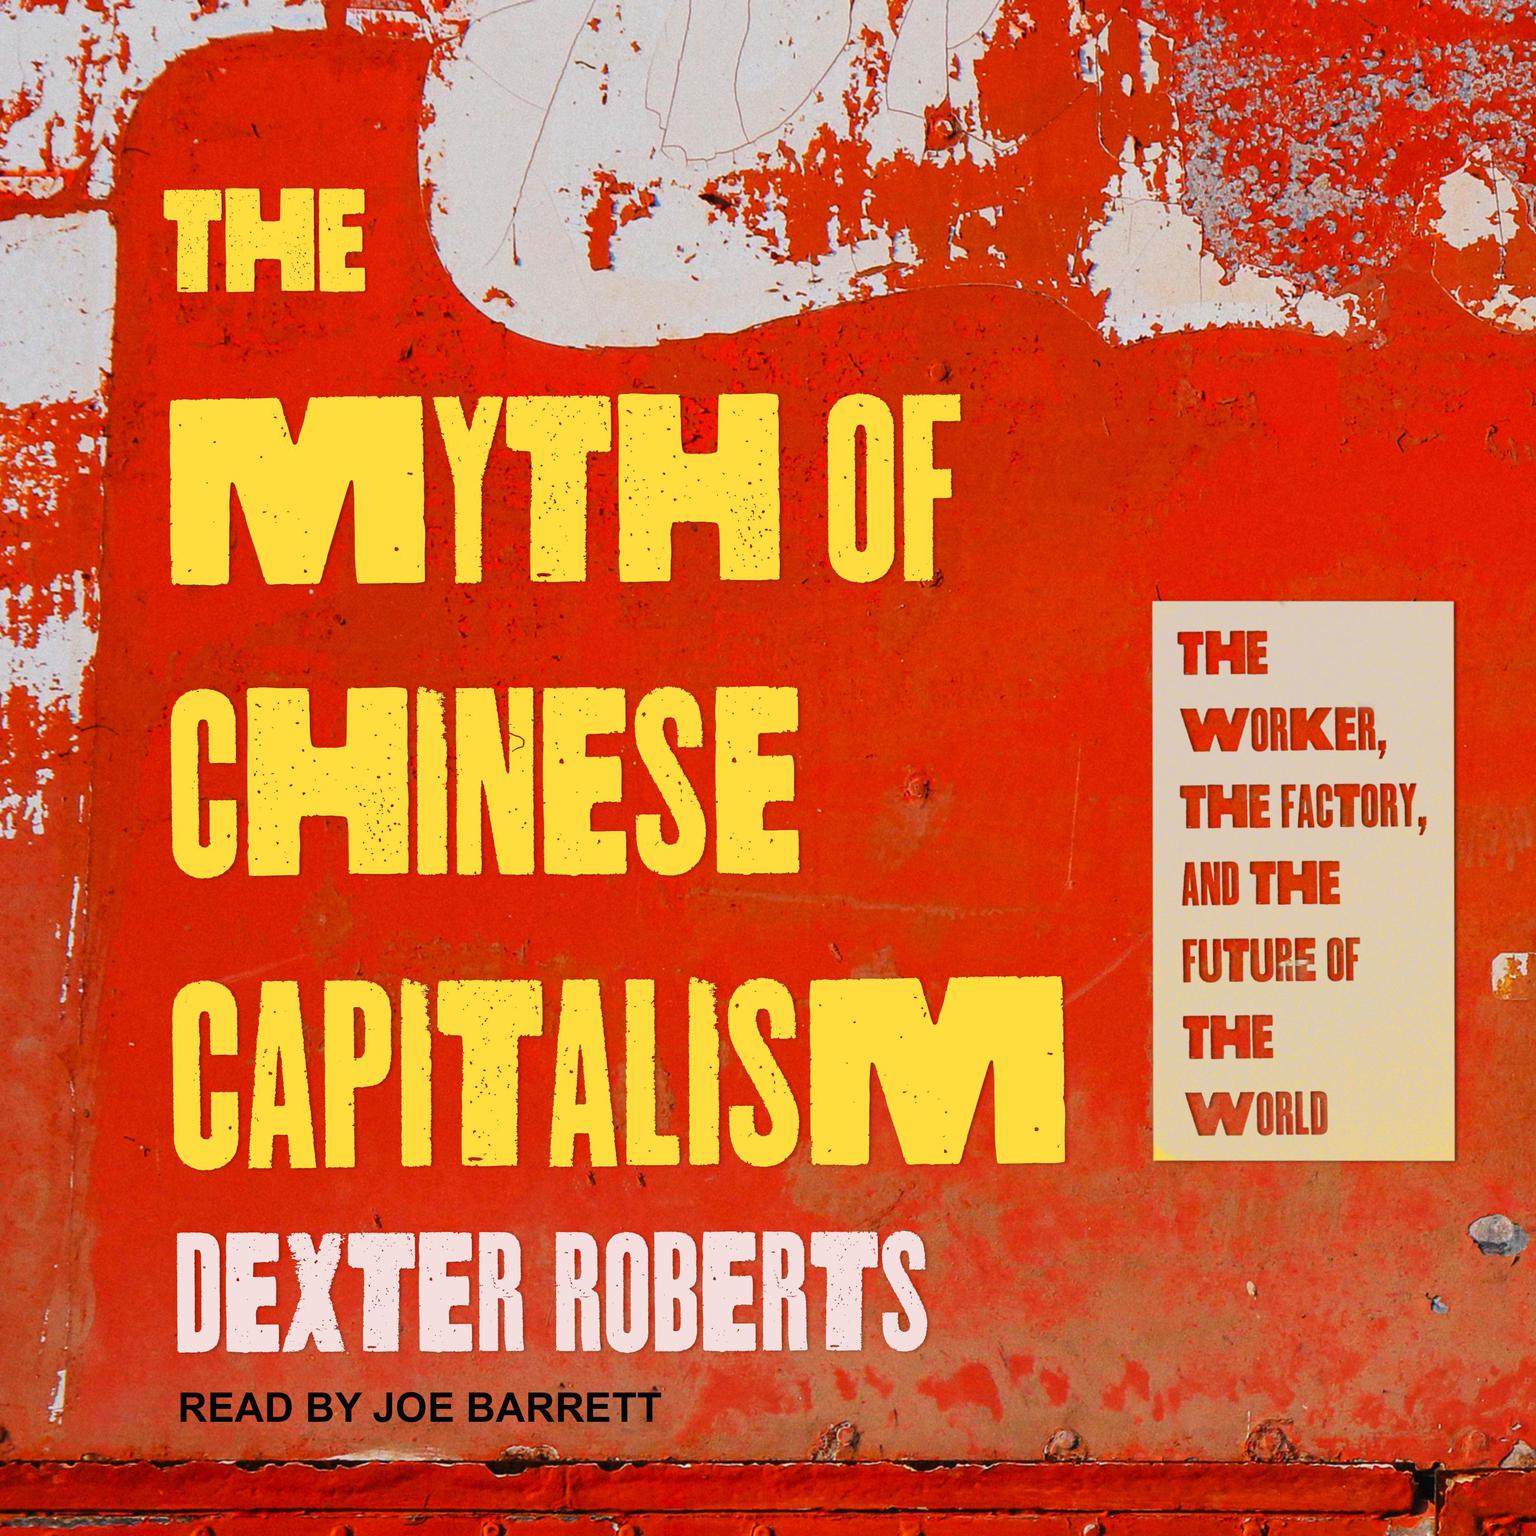 The Myth of Chinese Capitalism: The Worker, the Factory, and the Future of the World Audiobook, by Dexter Roberts